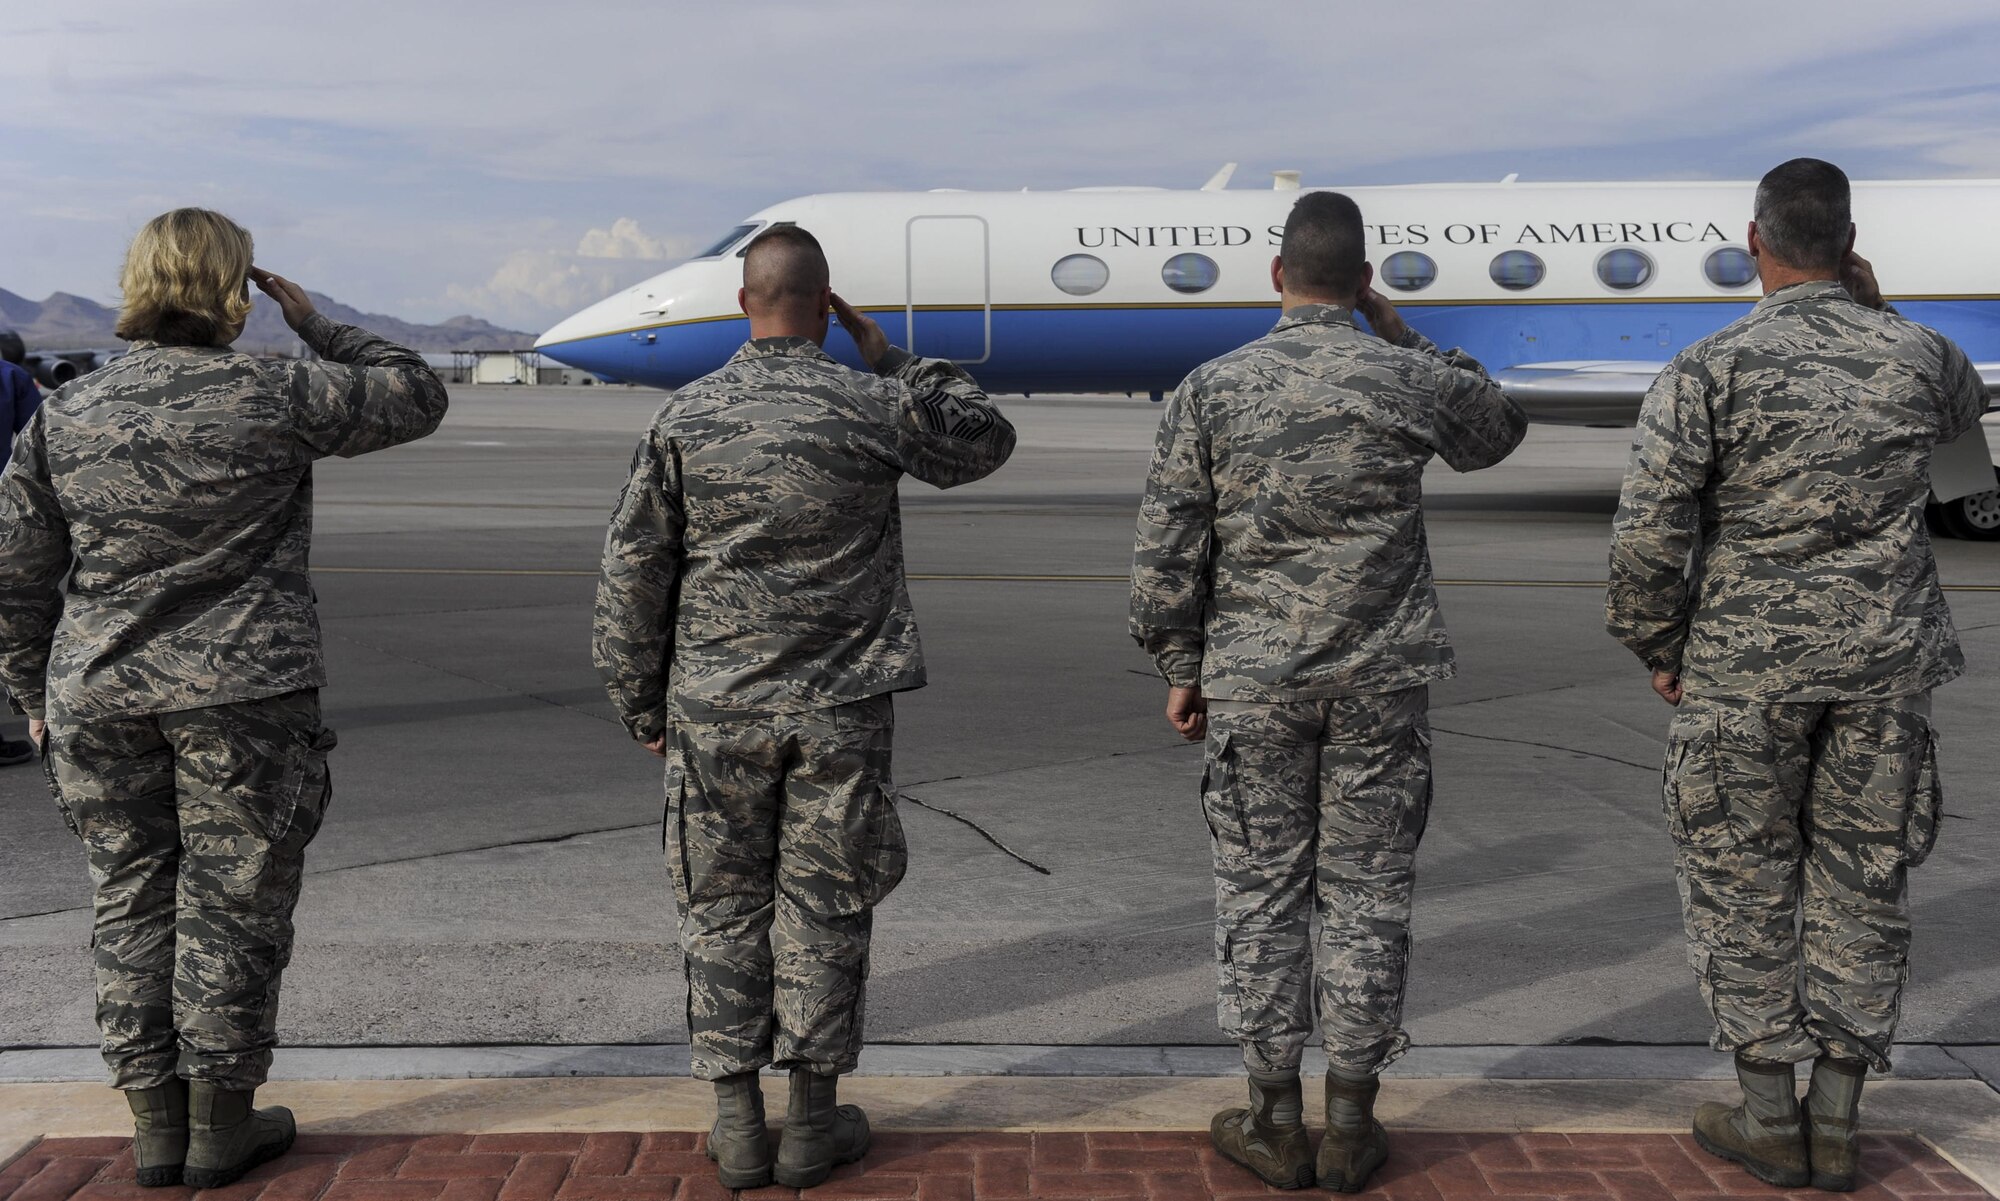 Leaders from the United States Warfare Center salute the jet of Secretary of the Air Force Heather Wilson as it arrives at Nellis Air Force Base, Nevada, July 17, 2017. Wilson witnessed firsthand how Airmen at Red Flag are training through innovation. (U.S. Air Force photo by Senior Airman Kevin Tanenbaum)